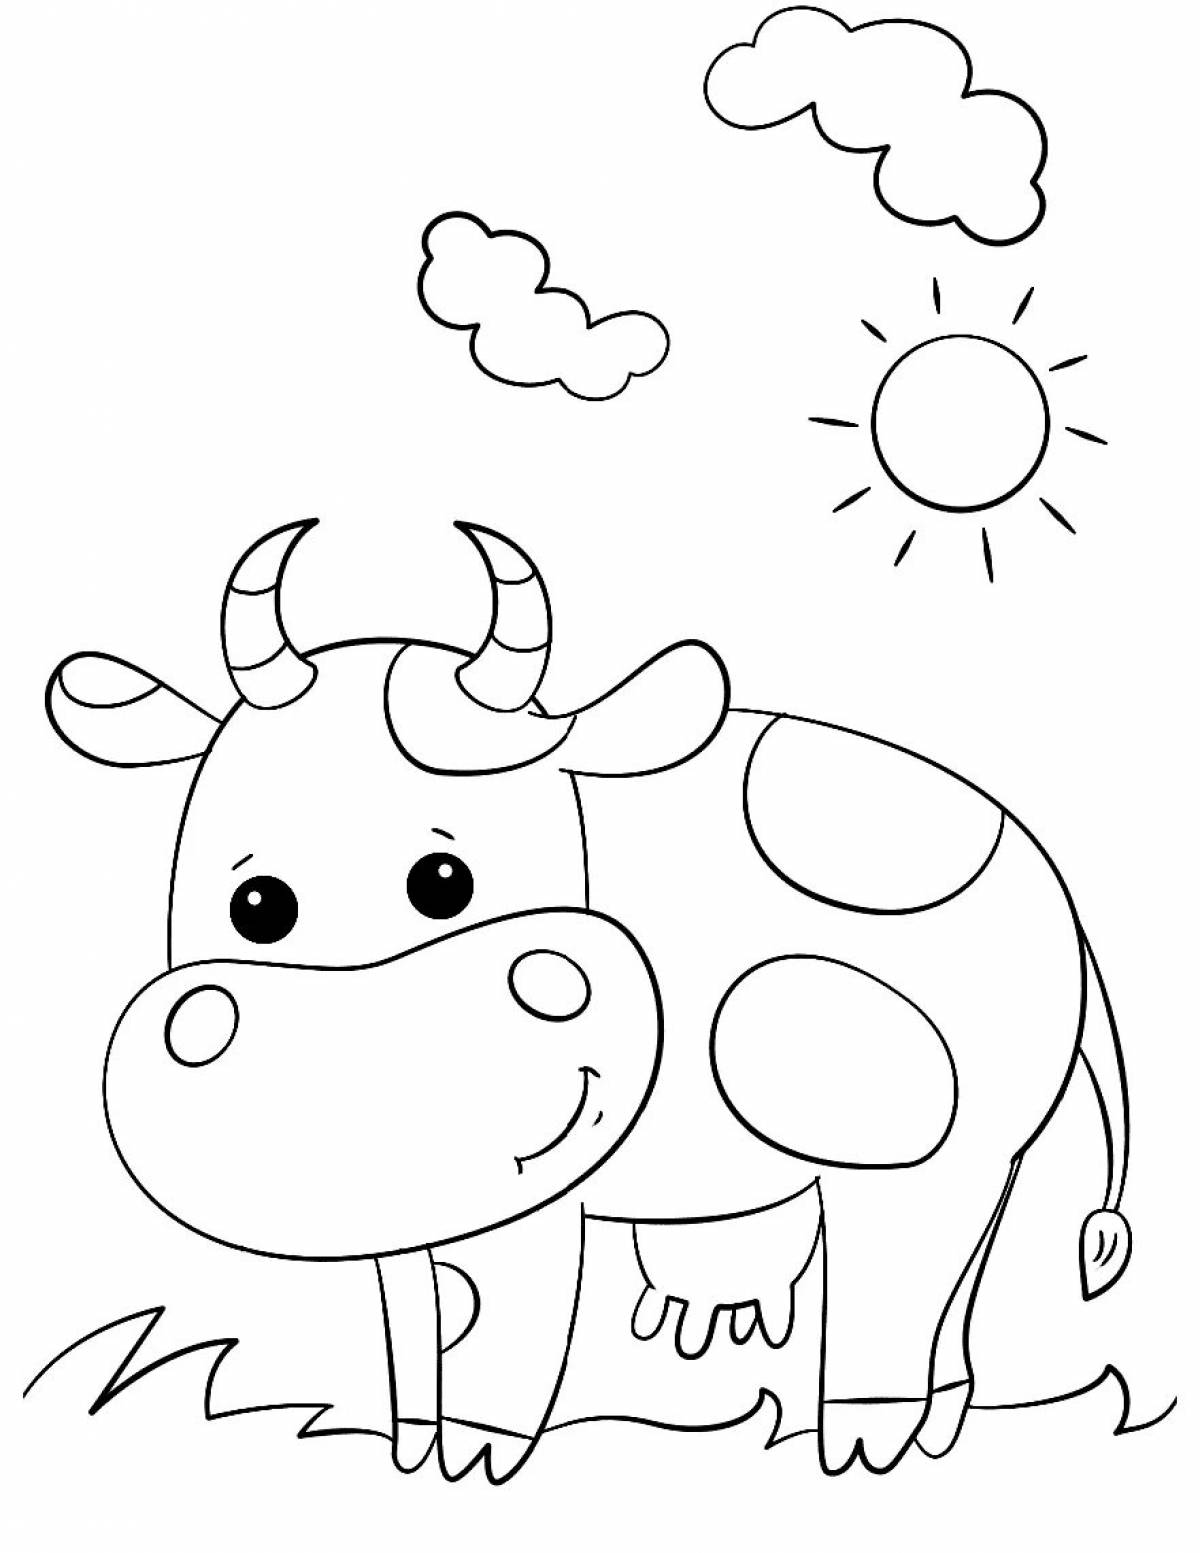 Fun coloring cow for toddlers 2 3 years old